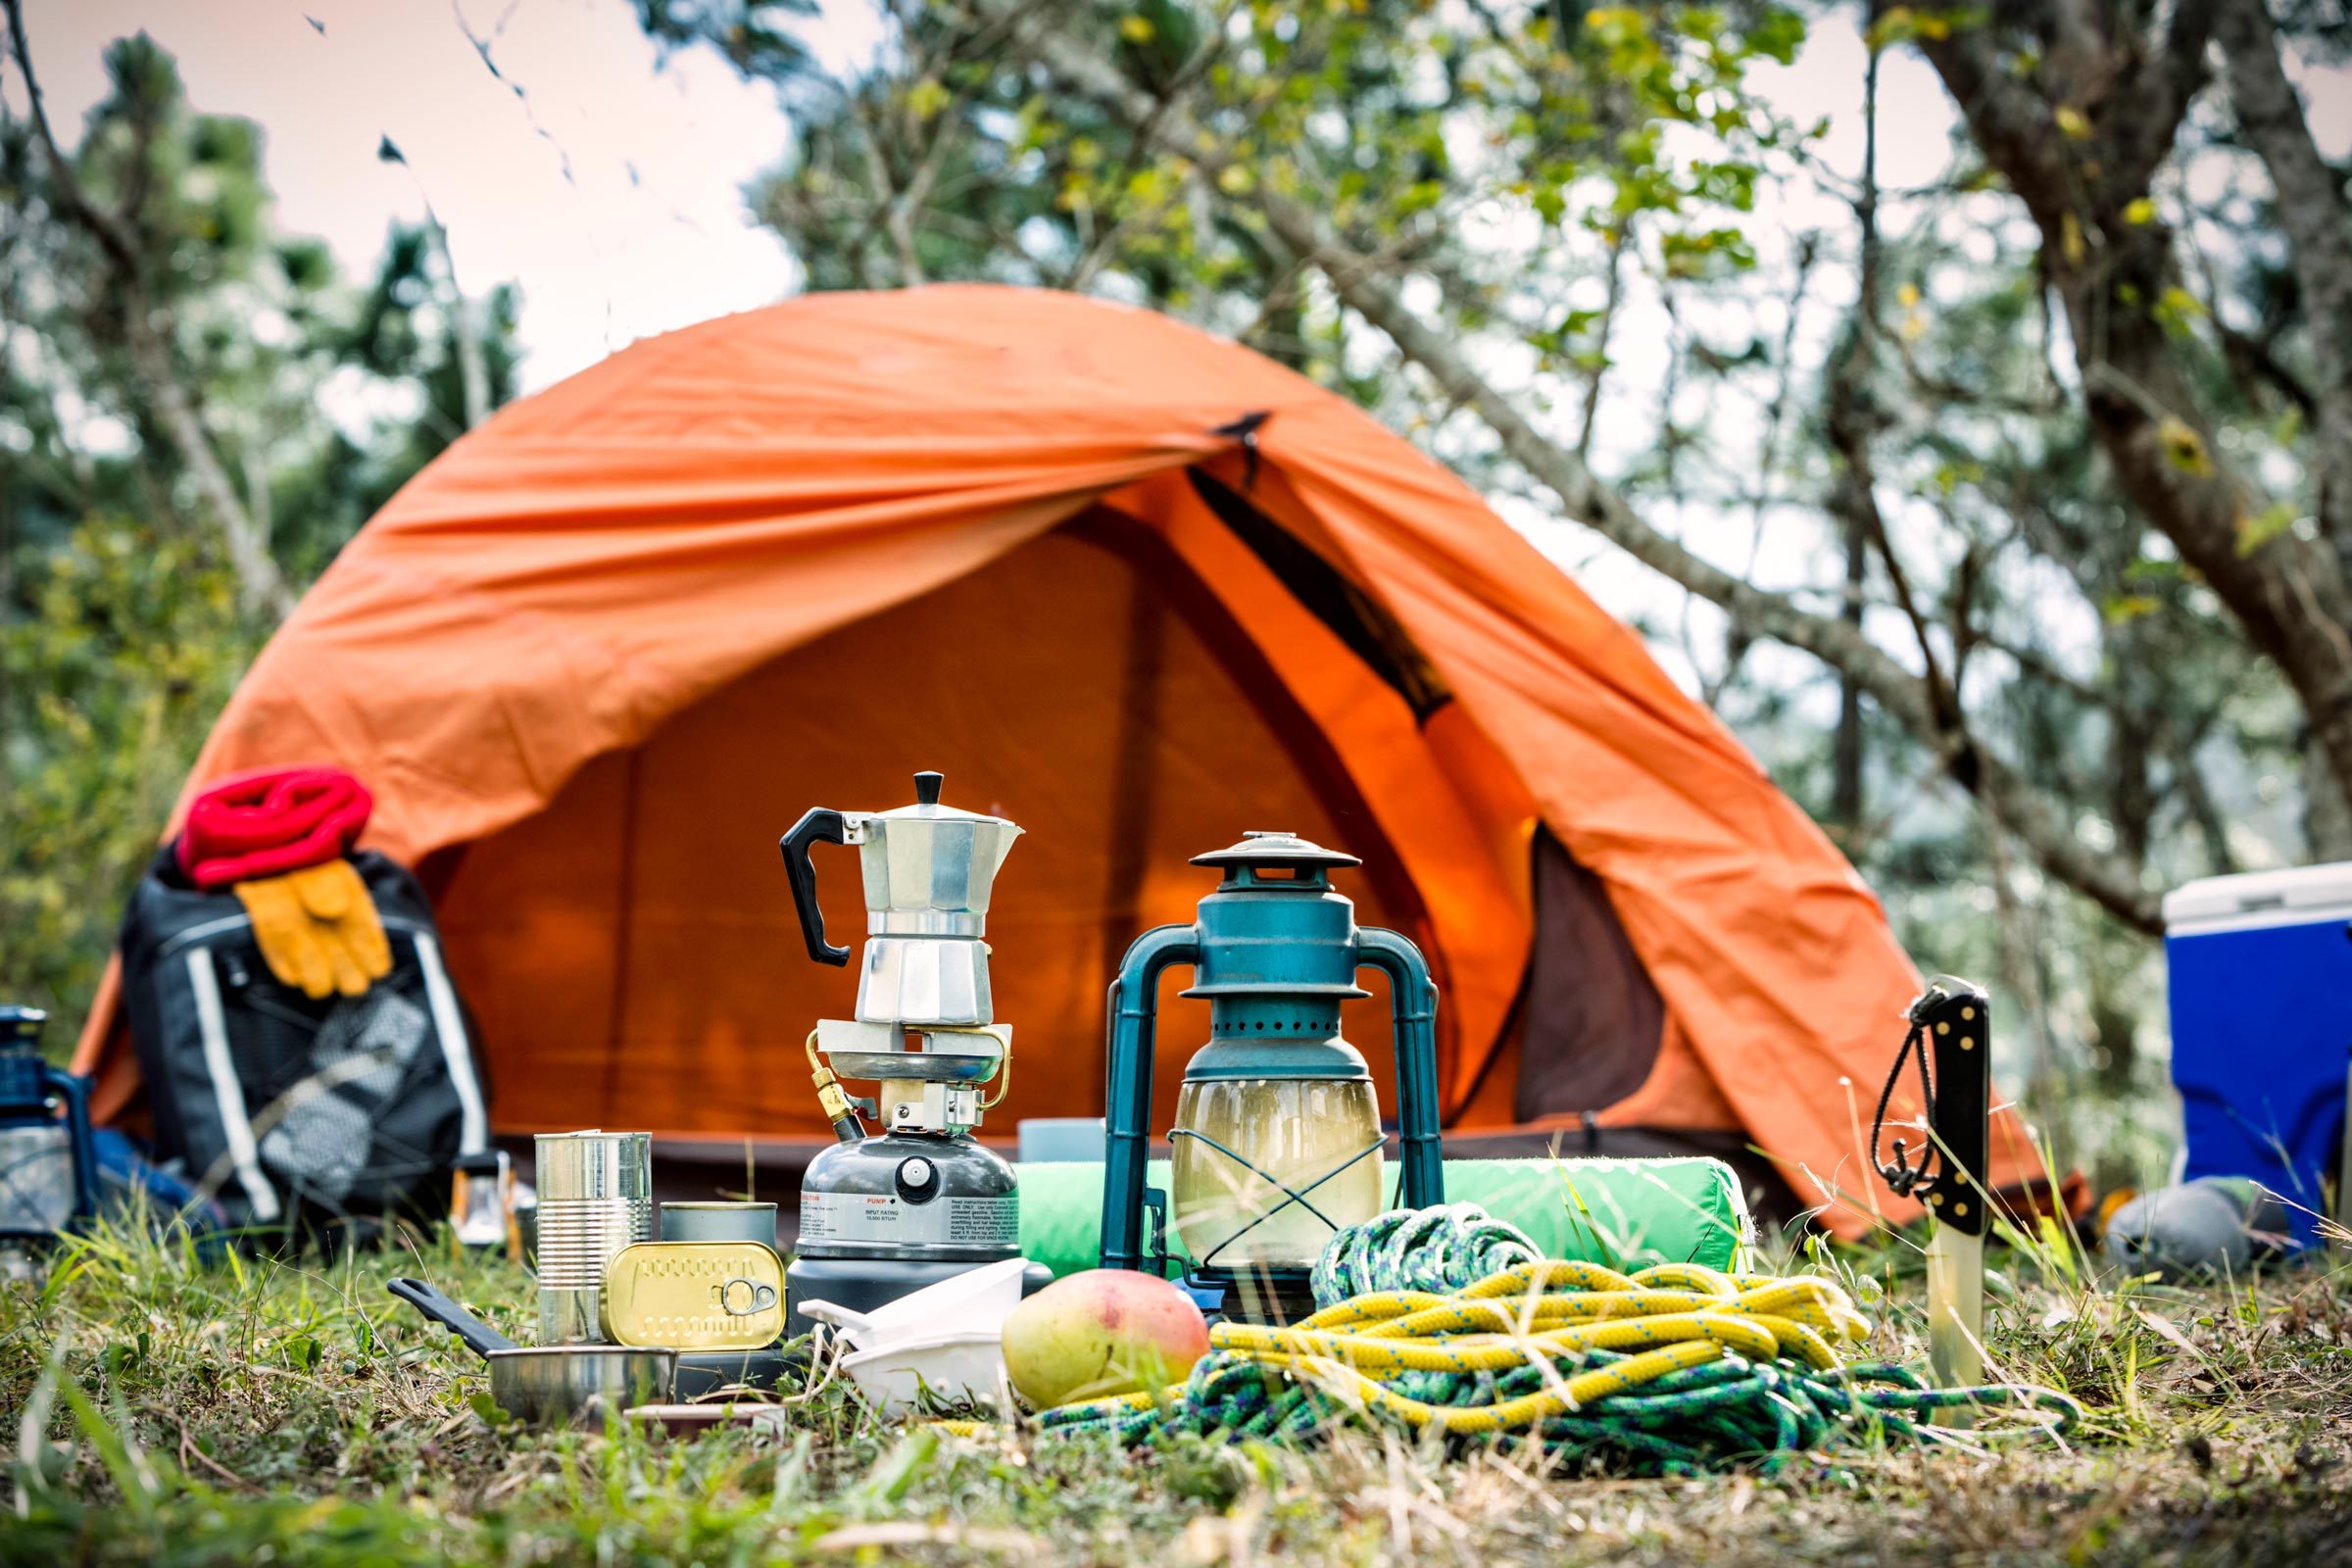 https://www.rd.com/wp-content/uploads/2023/05/RD-camping-GettyImages-994672418.jpg